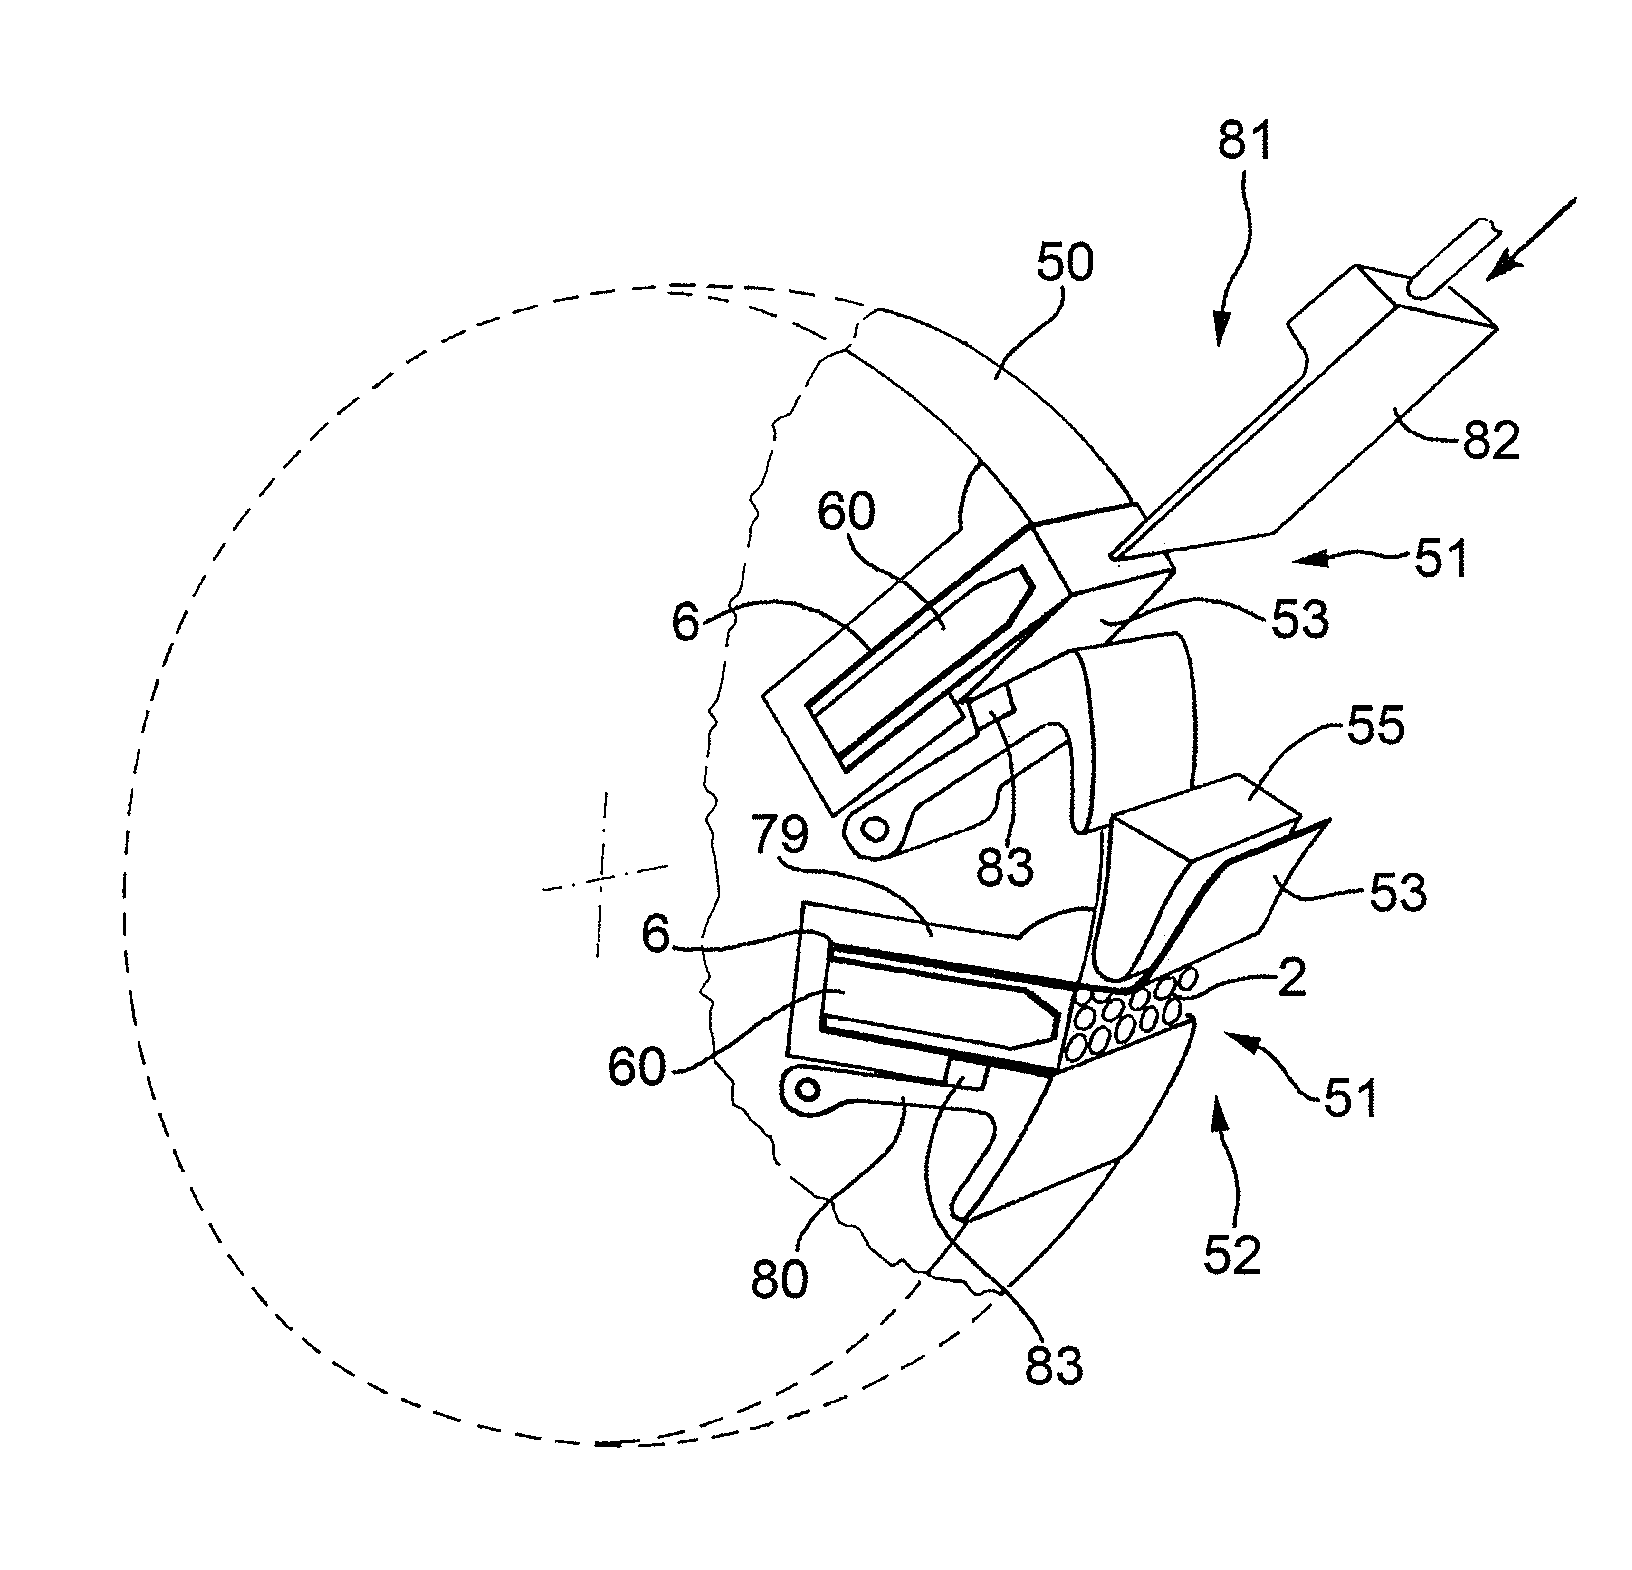 Wrapping method and unit for folding a sheet of wrapping material about a group of cigarettes